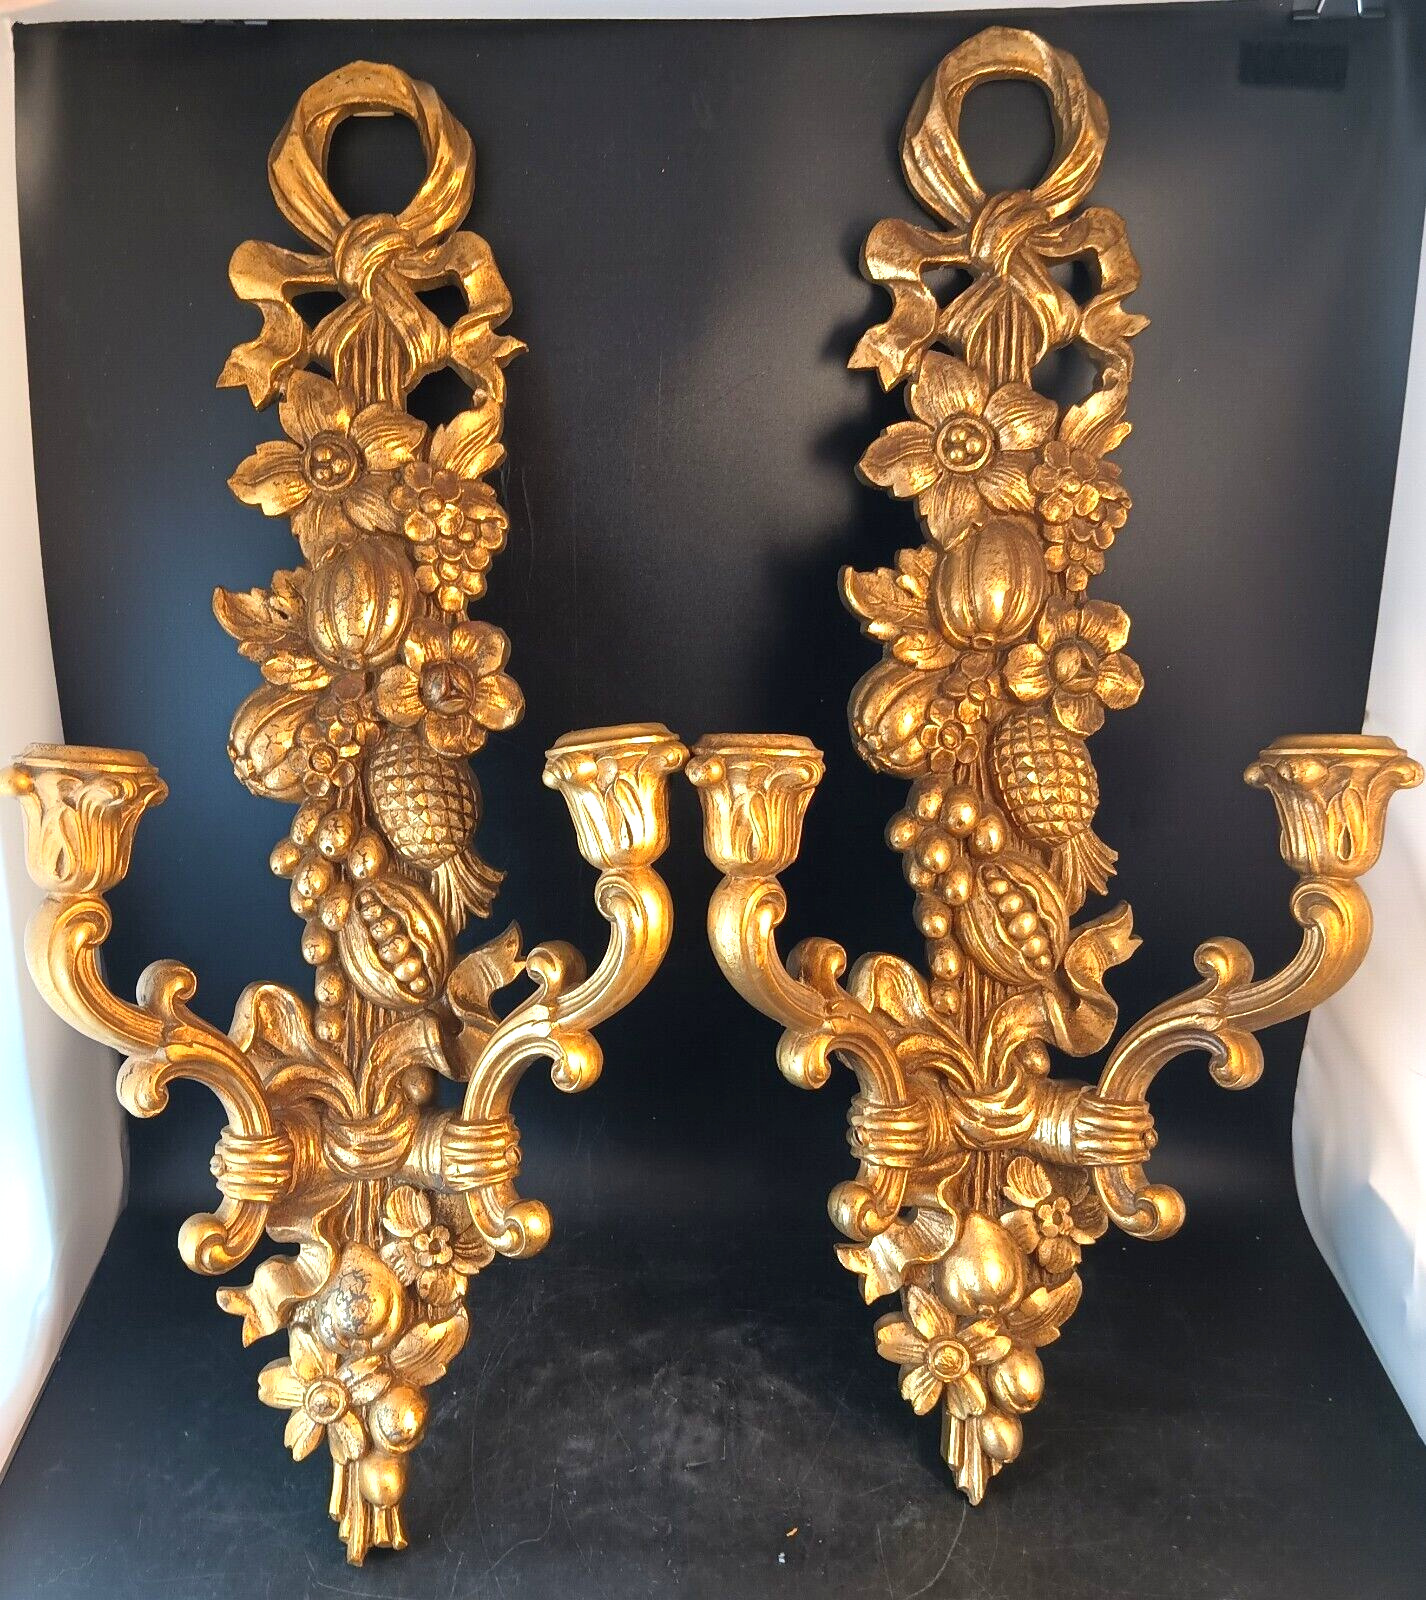 Gold Candle Wall Sconces By Syroco Hollywood Regency Ornate Gold MCM Decor   OBO